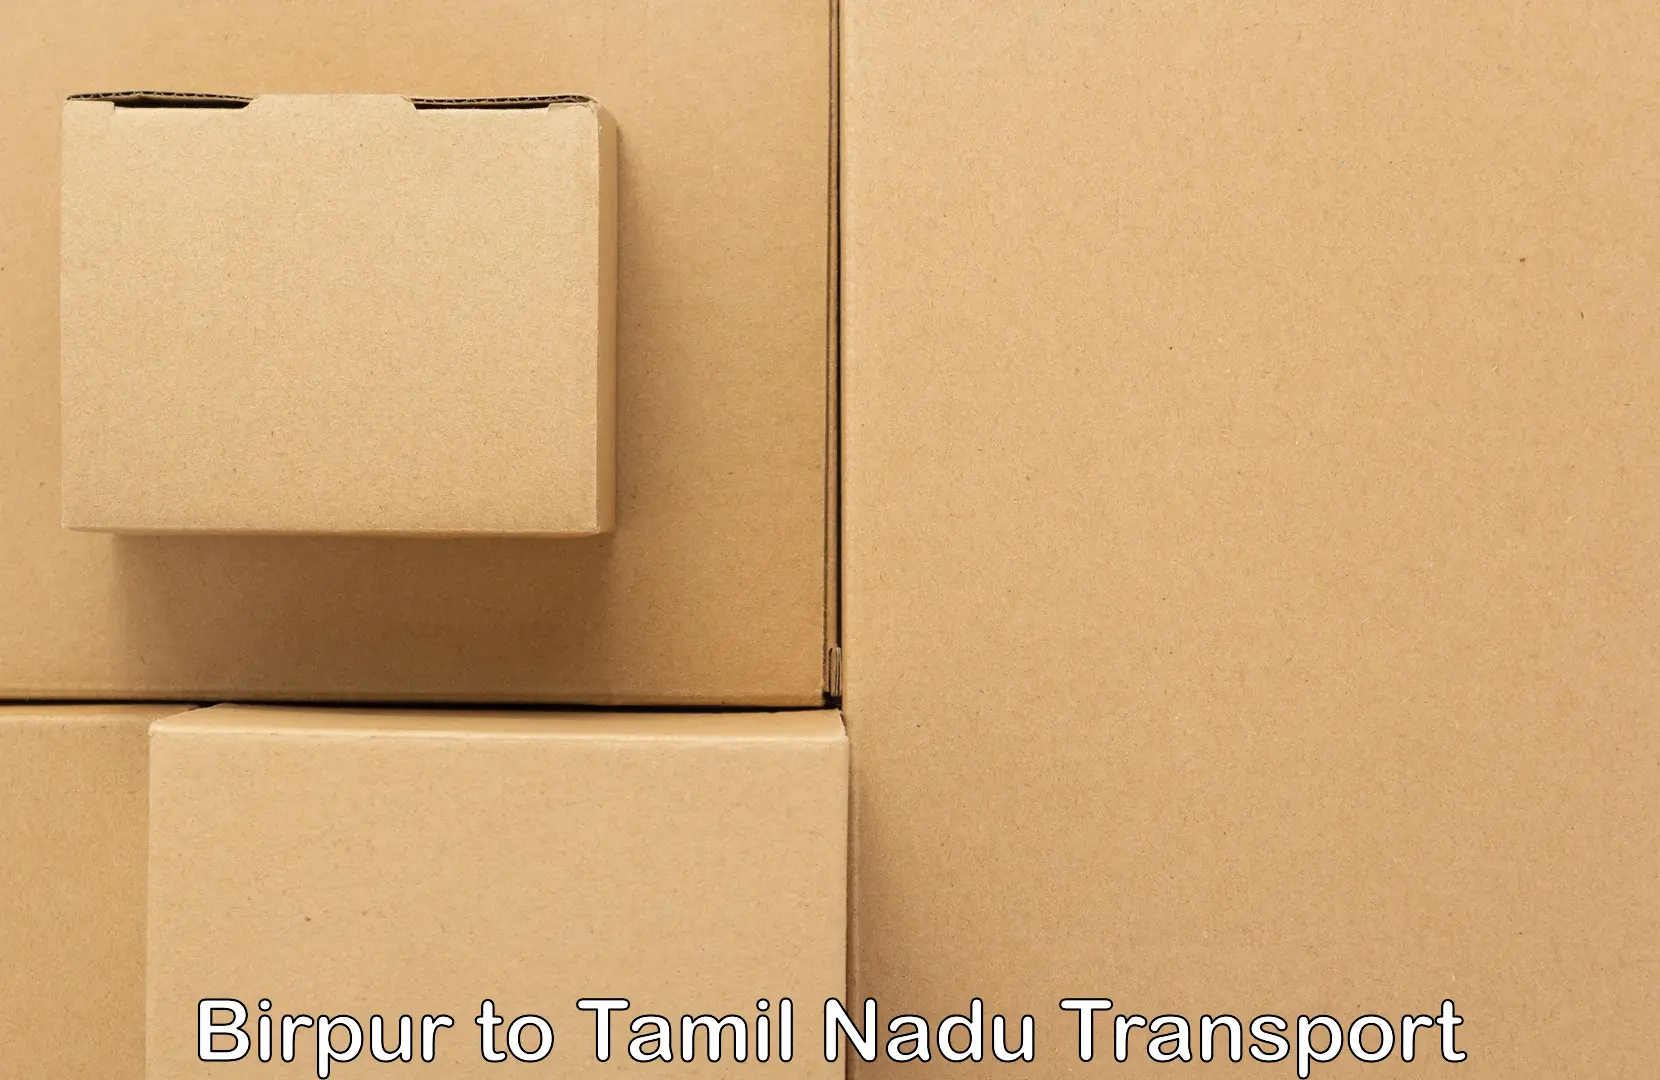 Land transport services in Birpur to Coimbatore